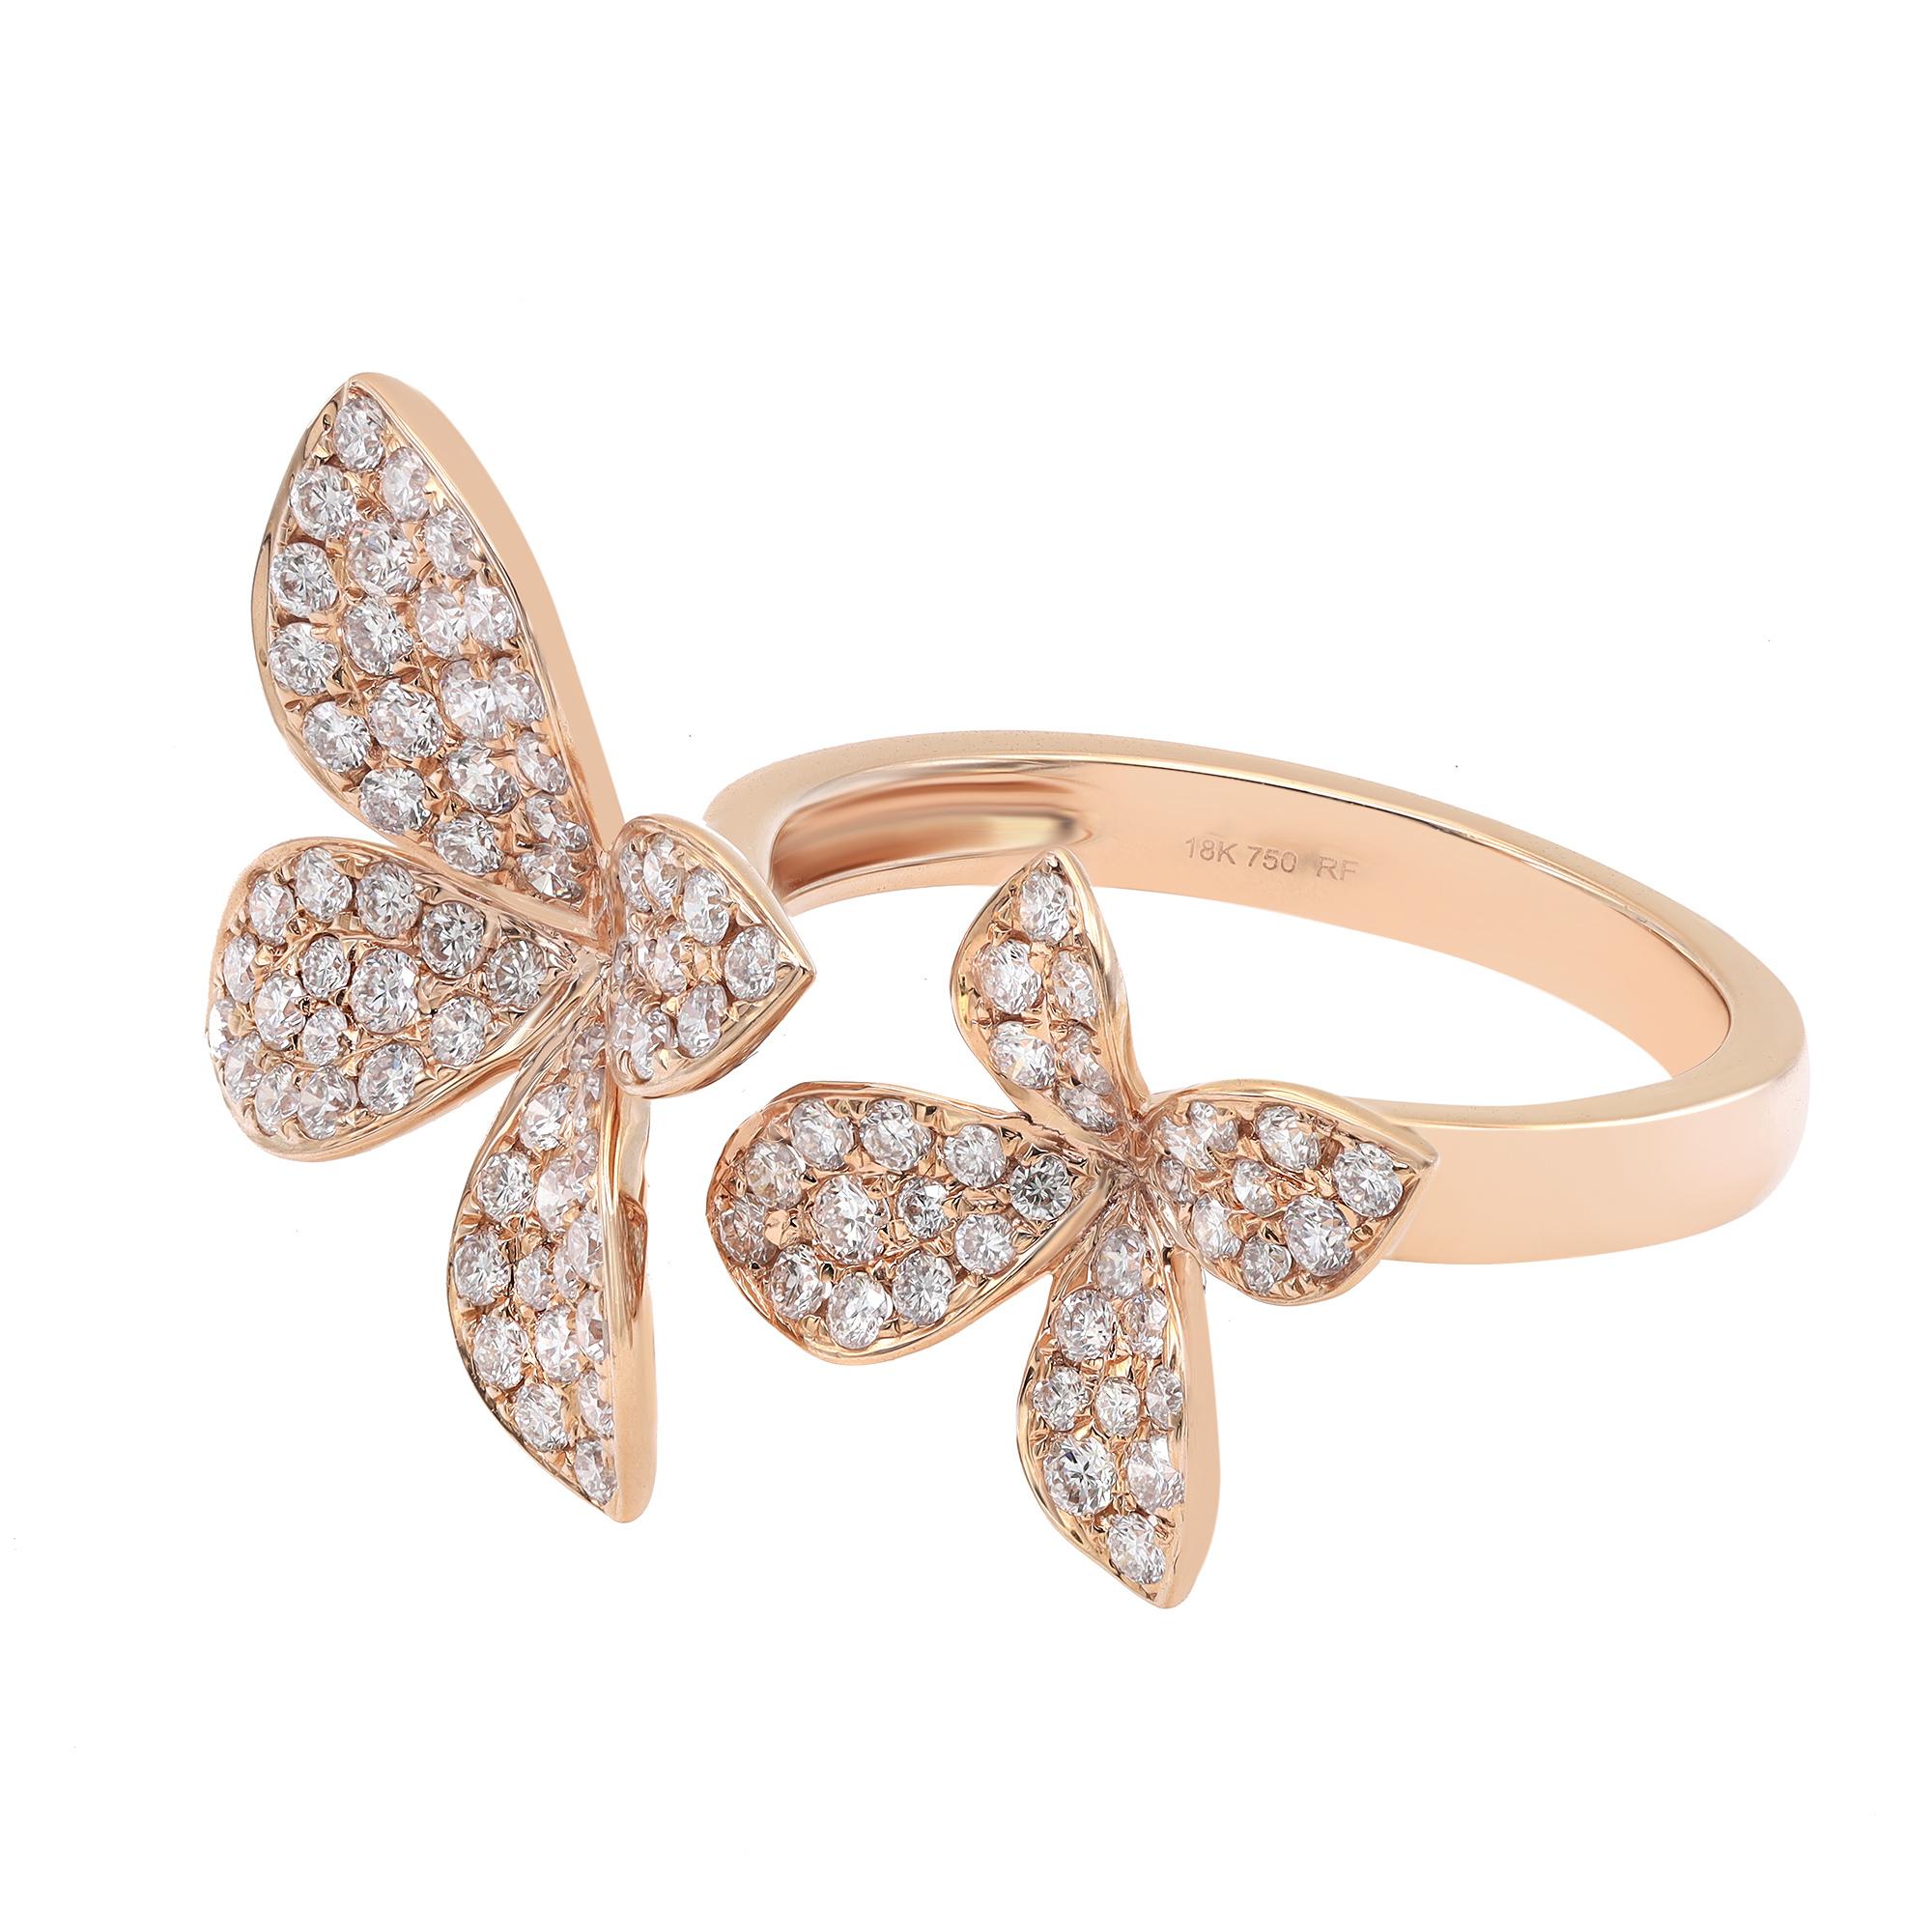 Fun and beautiful diamond double flower cocktail ring. This ring features two beautifully crafted flowers in 18k rose gold, encrusted with dazzling round cut diamonds. A great pick for any occasion. Total diamond weight: 0.95 carat. Diamond quality: